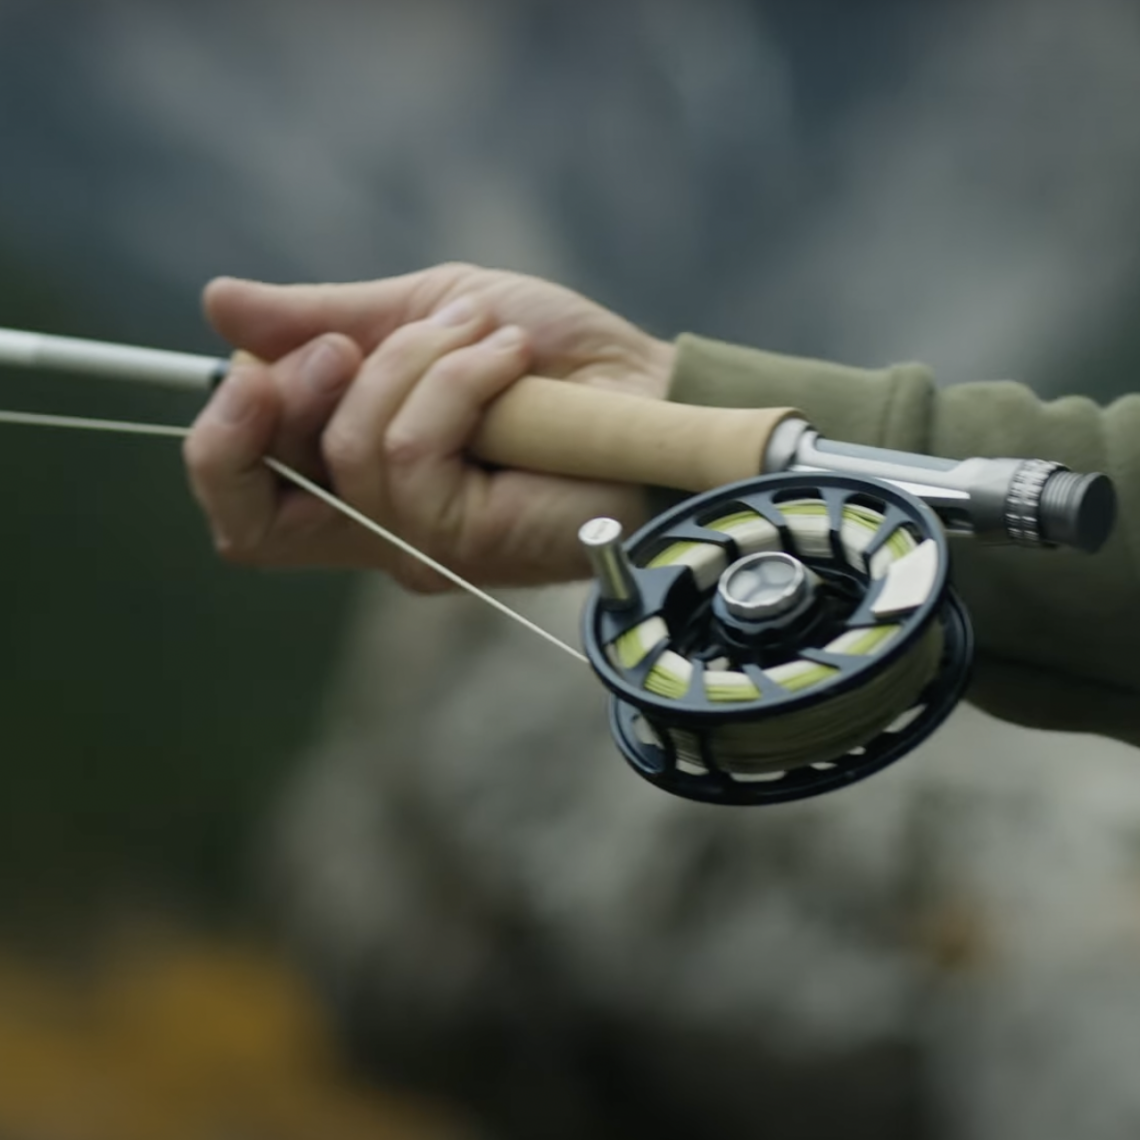 ORVIS HELIOS 4 FLY ROD REVIEW: Is it Really 4x Better? - fisherofzen